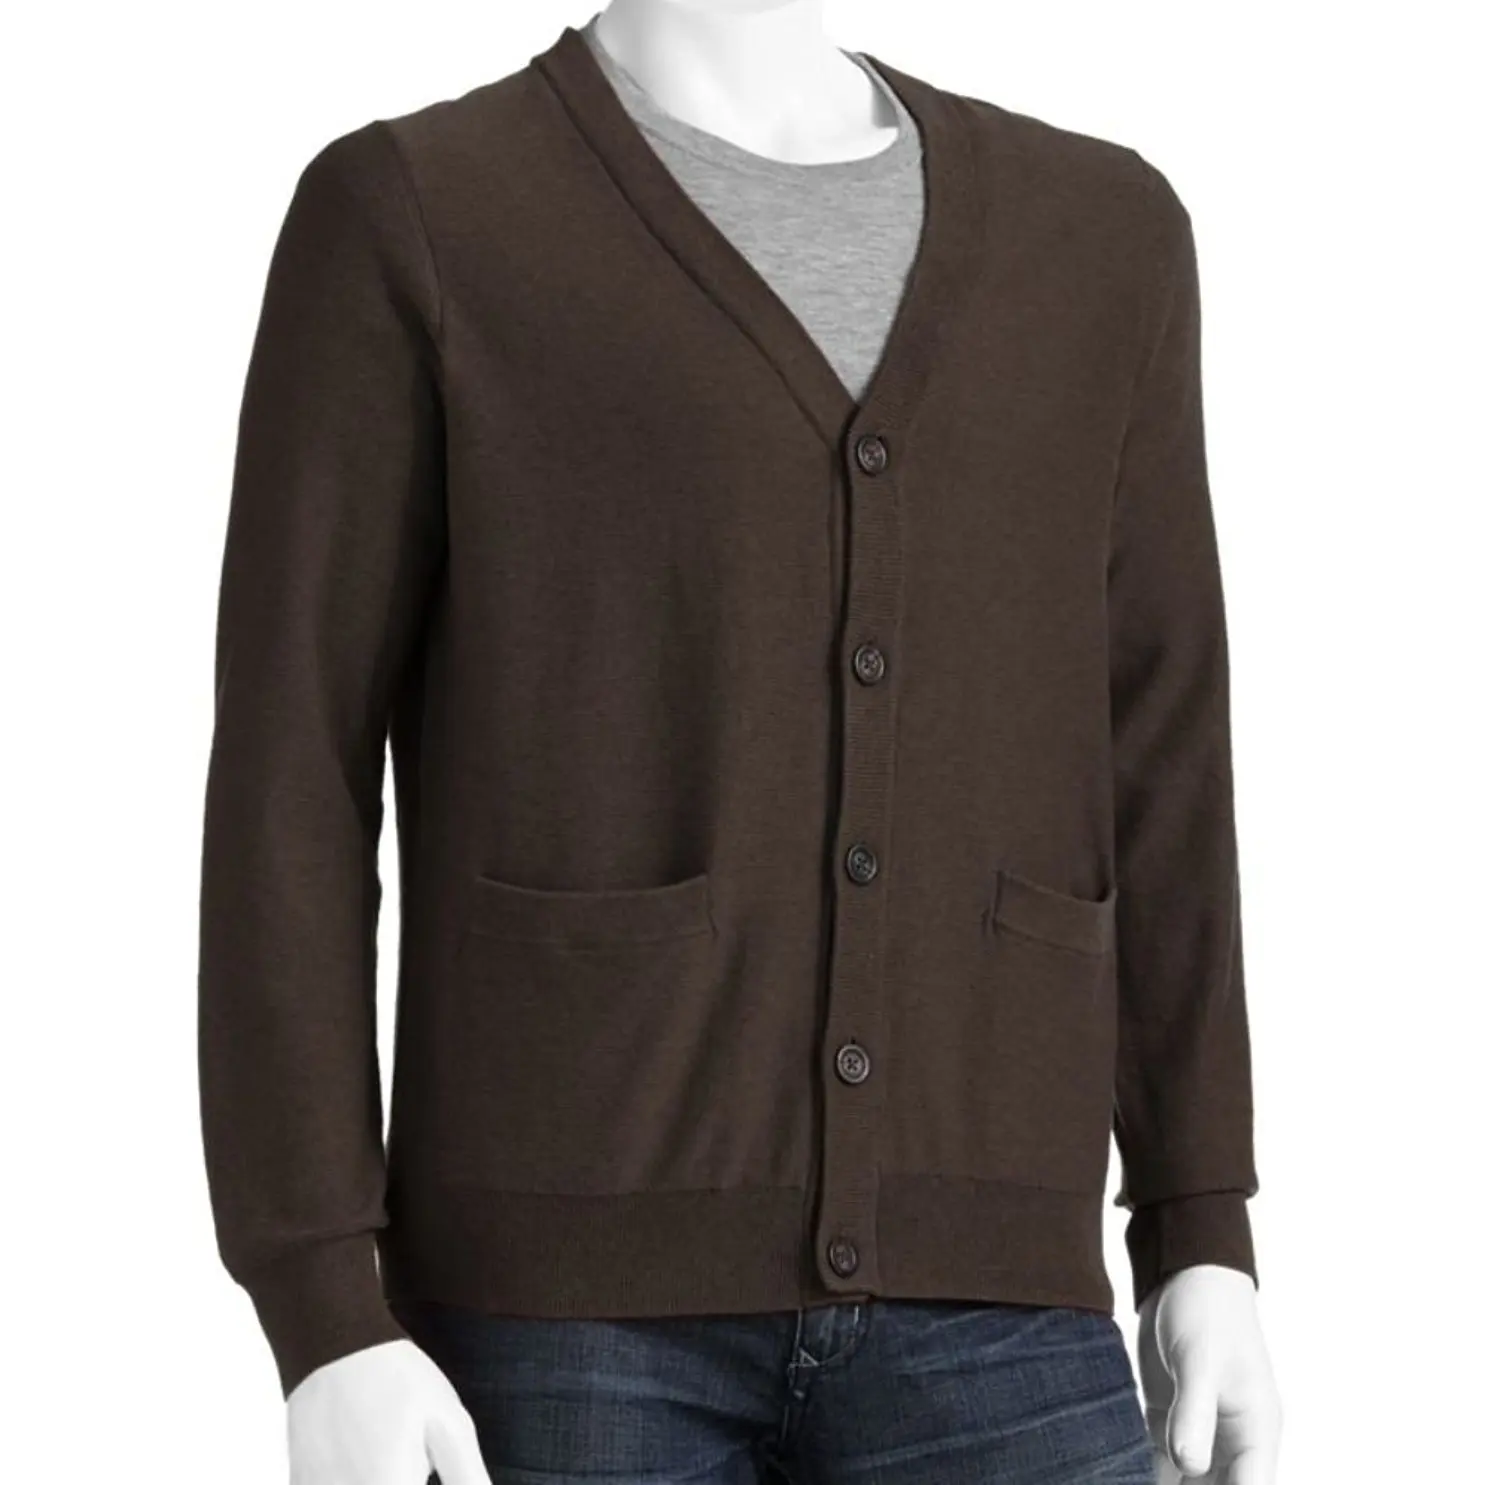 Buy Sonoma Mens Cardigan 100% Cotton Sweater Large Tall LT Brown in ...